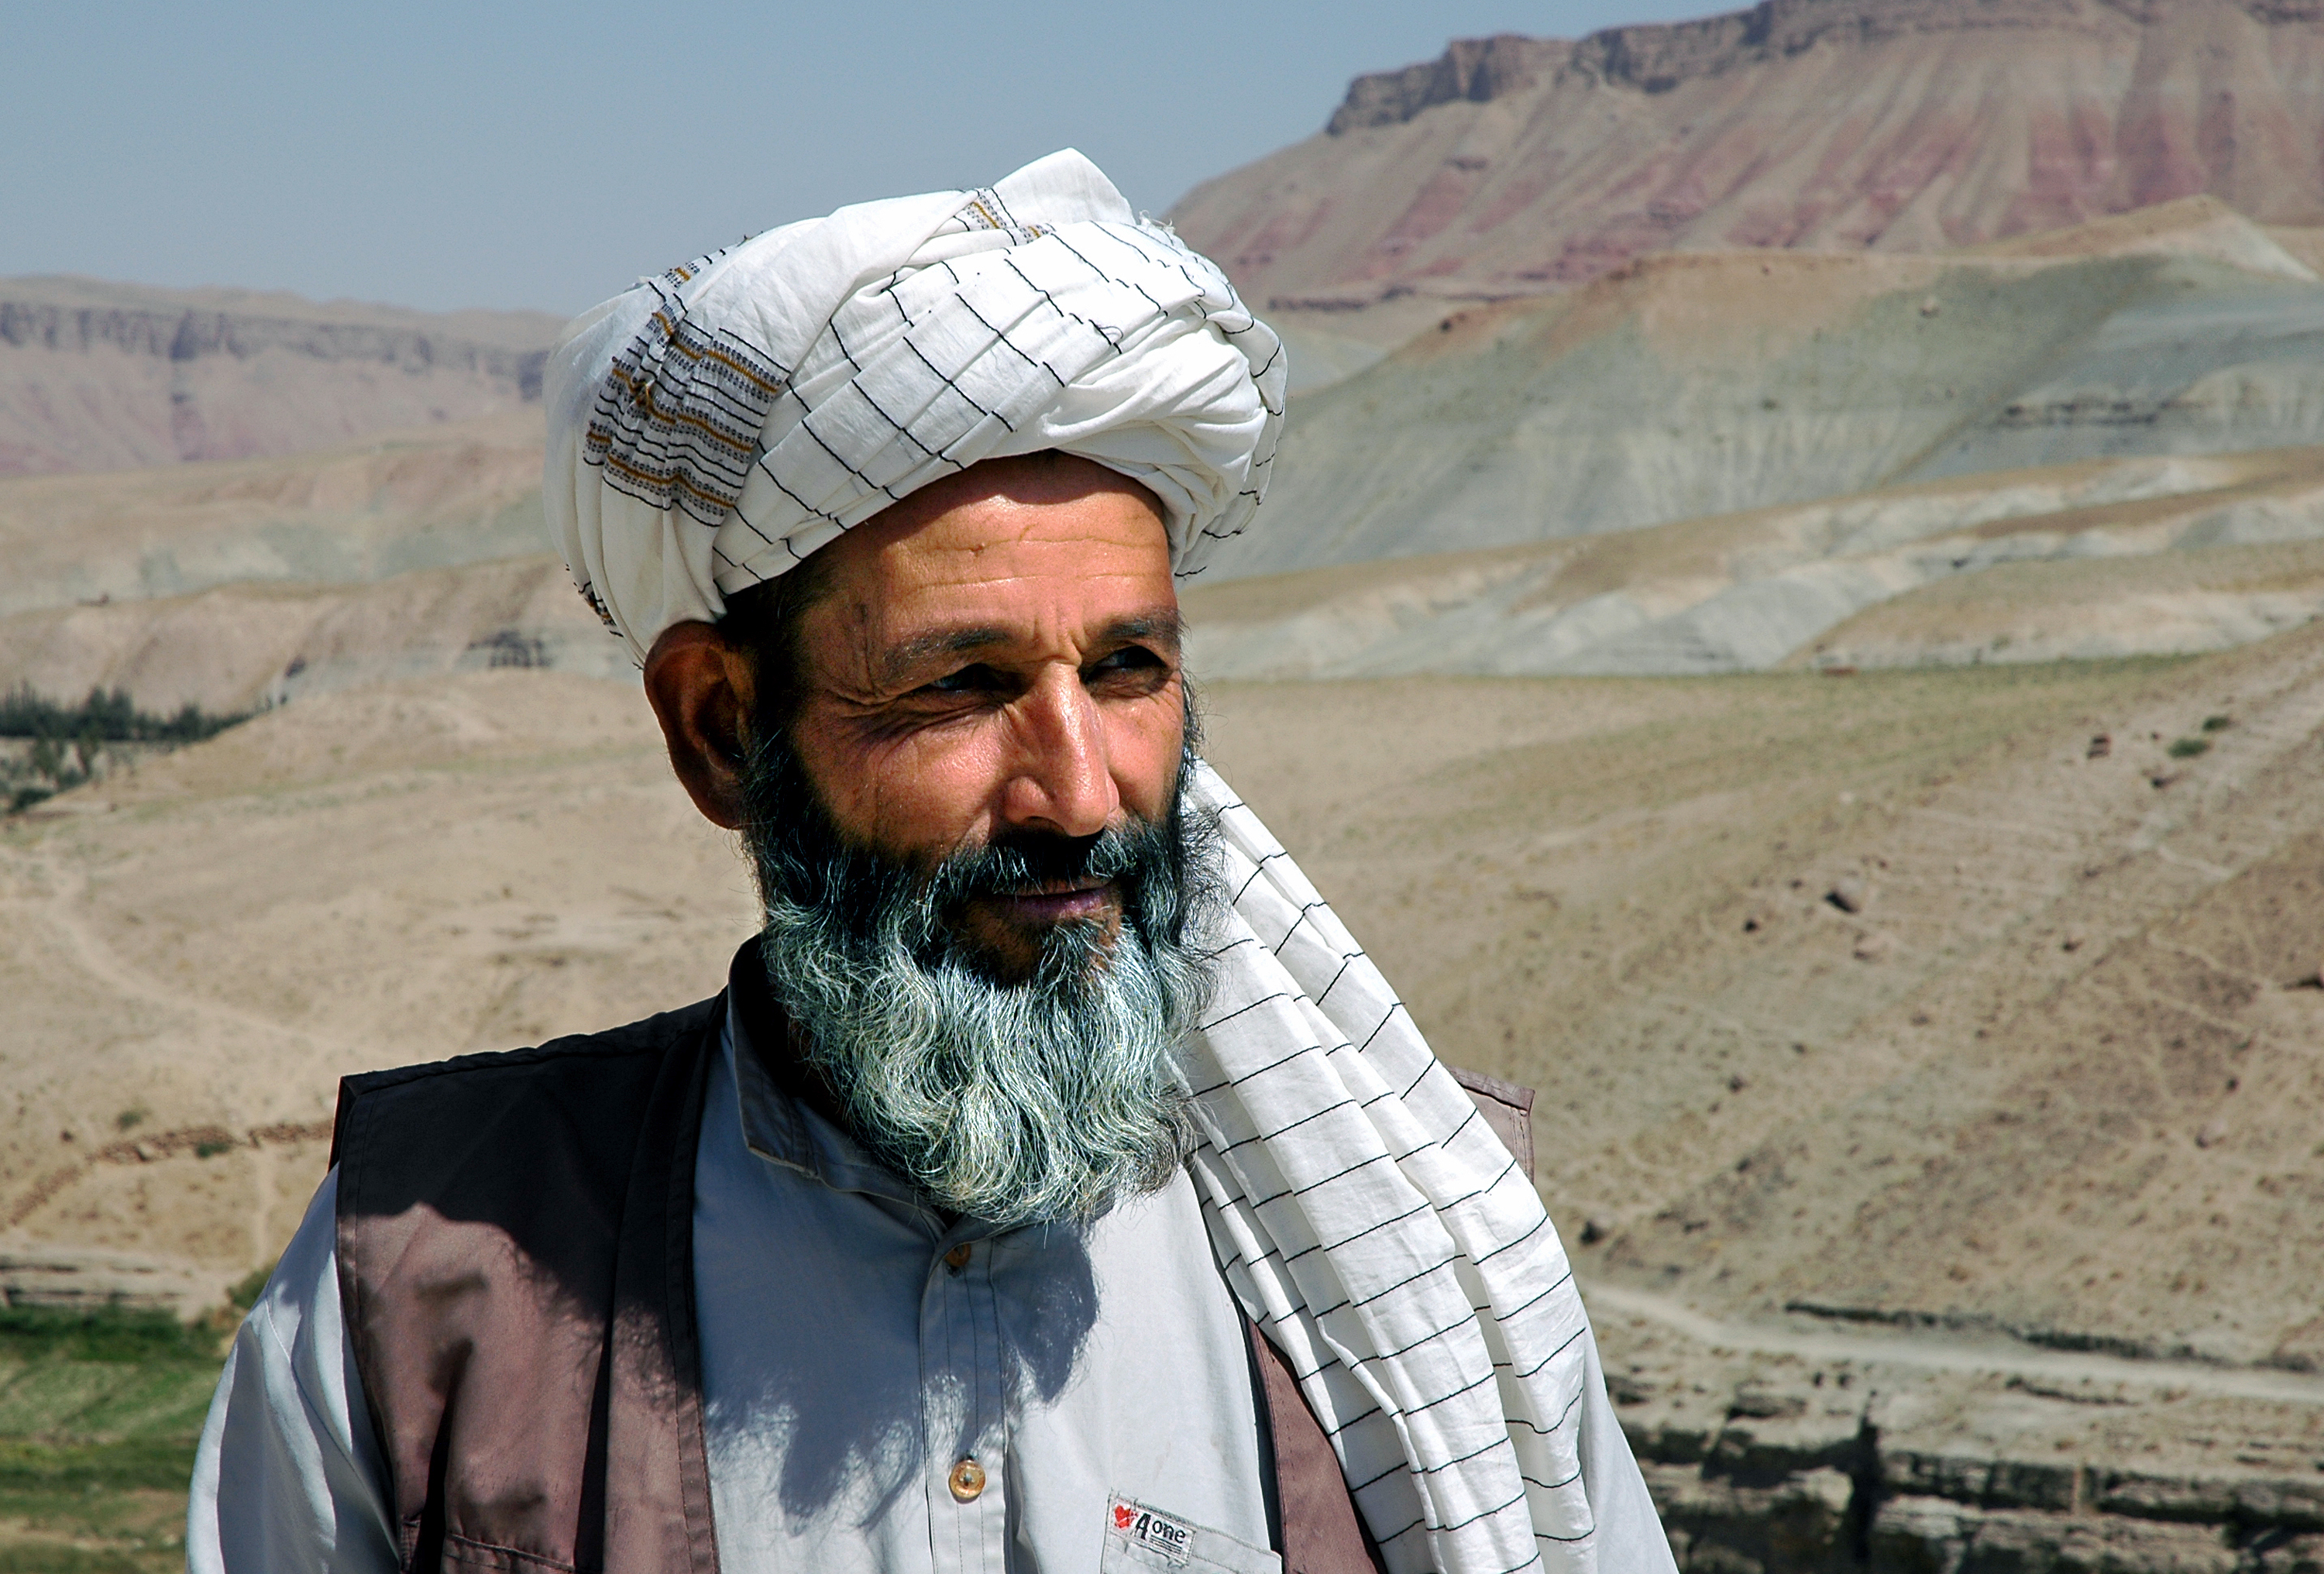 Village between Herat and Qala-e-Naw, Herat Province / Afghanistan. A local Afghan man wearing a turban with a backdrop of mountain scenery in a remote part of western Afghanistan